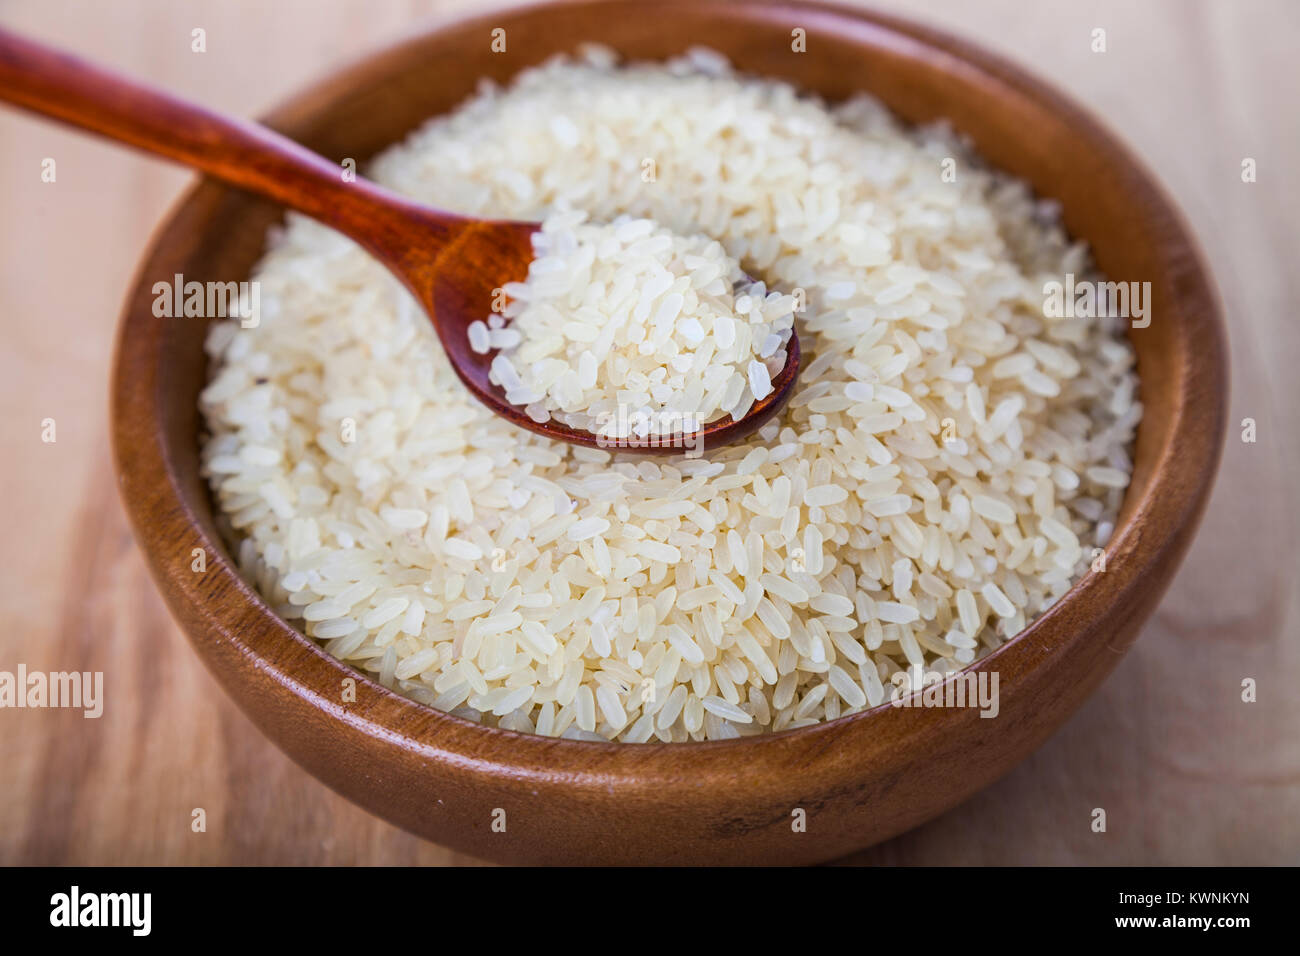 Raw long-grain steamed rice in a bowl on a wooden background. Ingredient for a healthy diet. Stock Photo